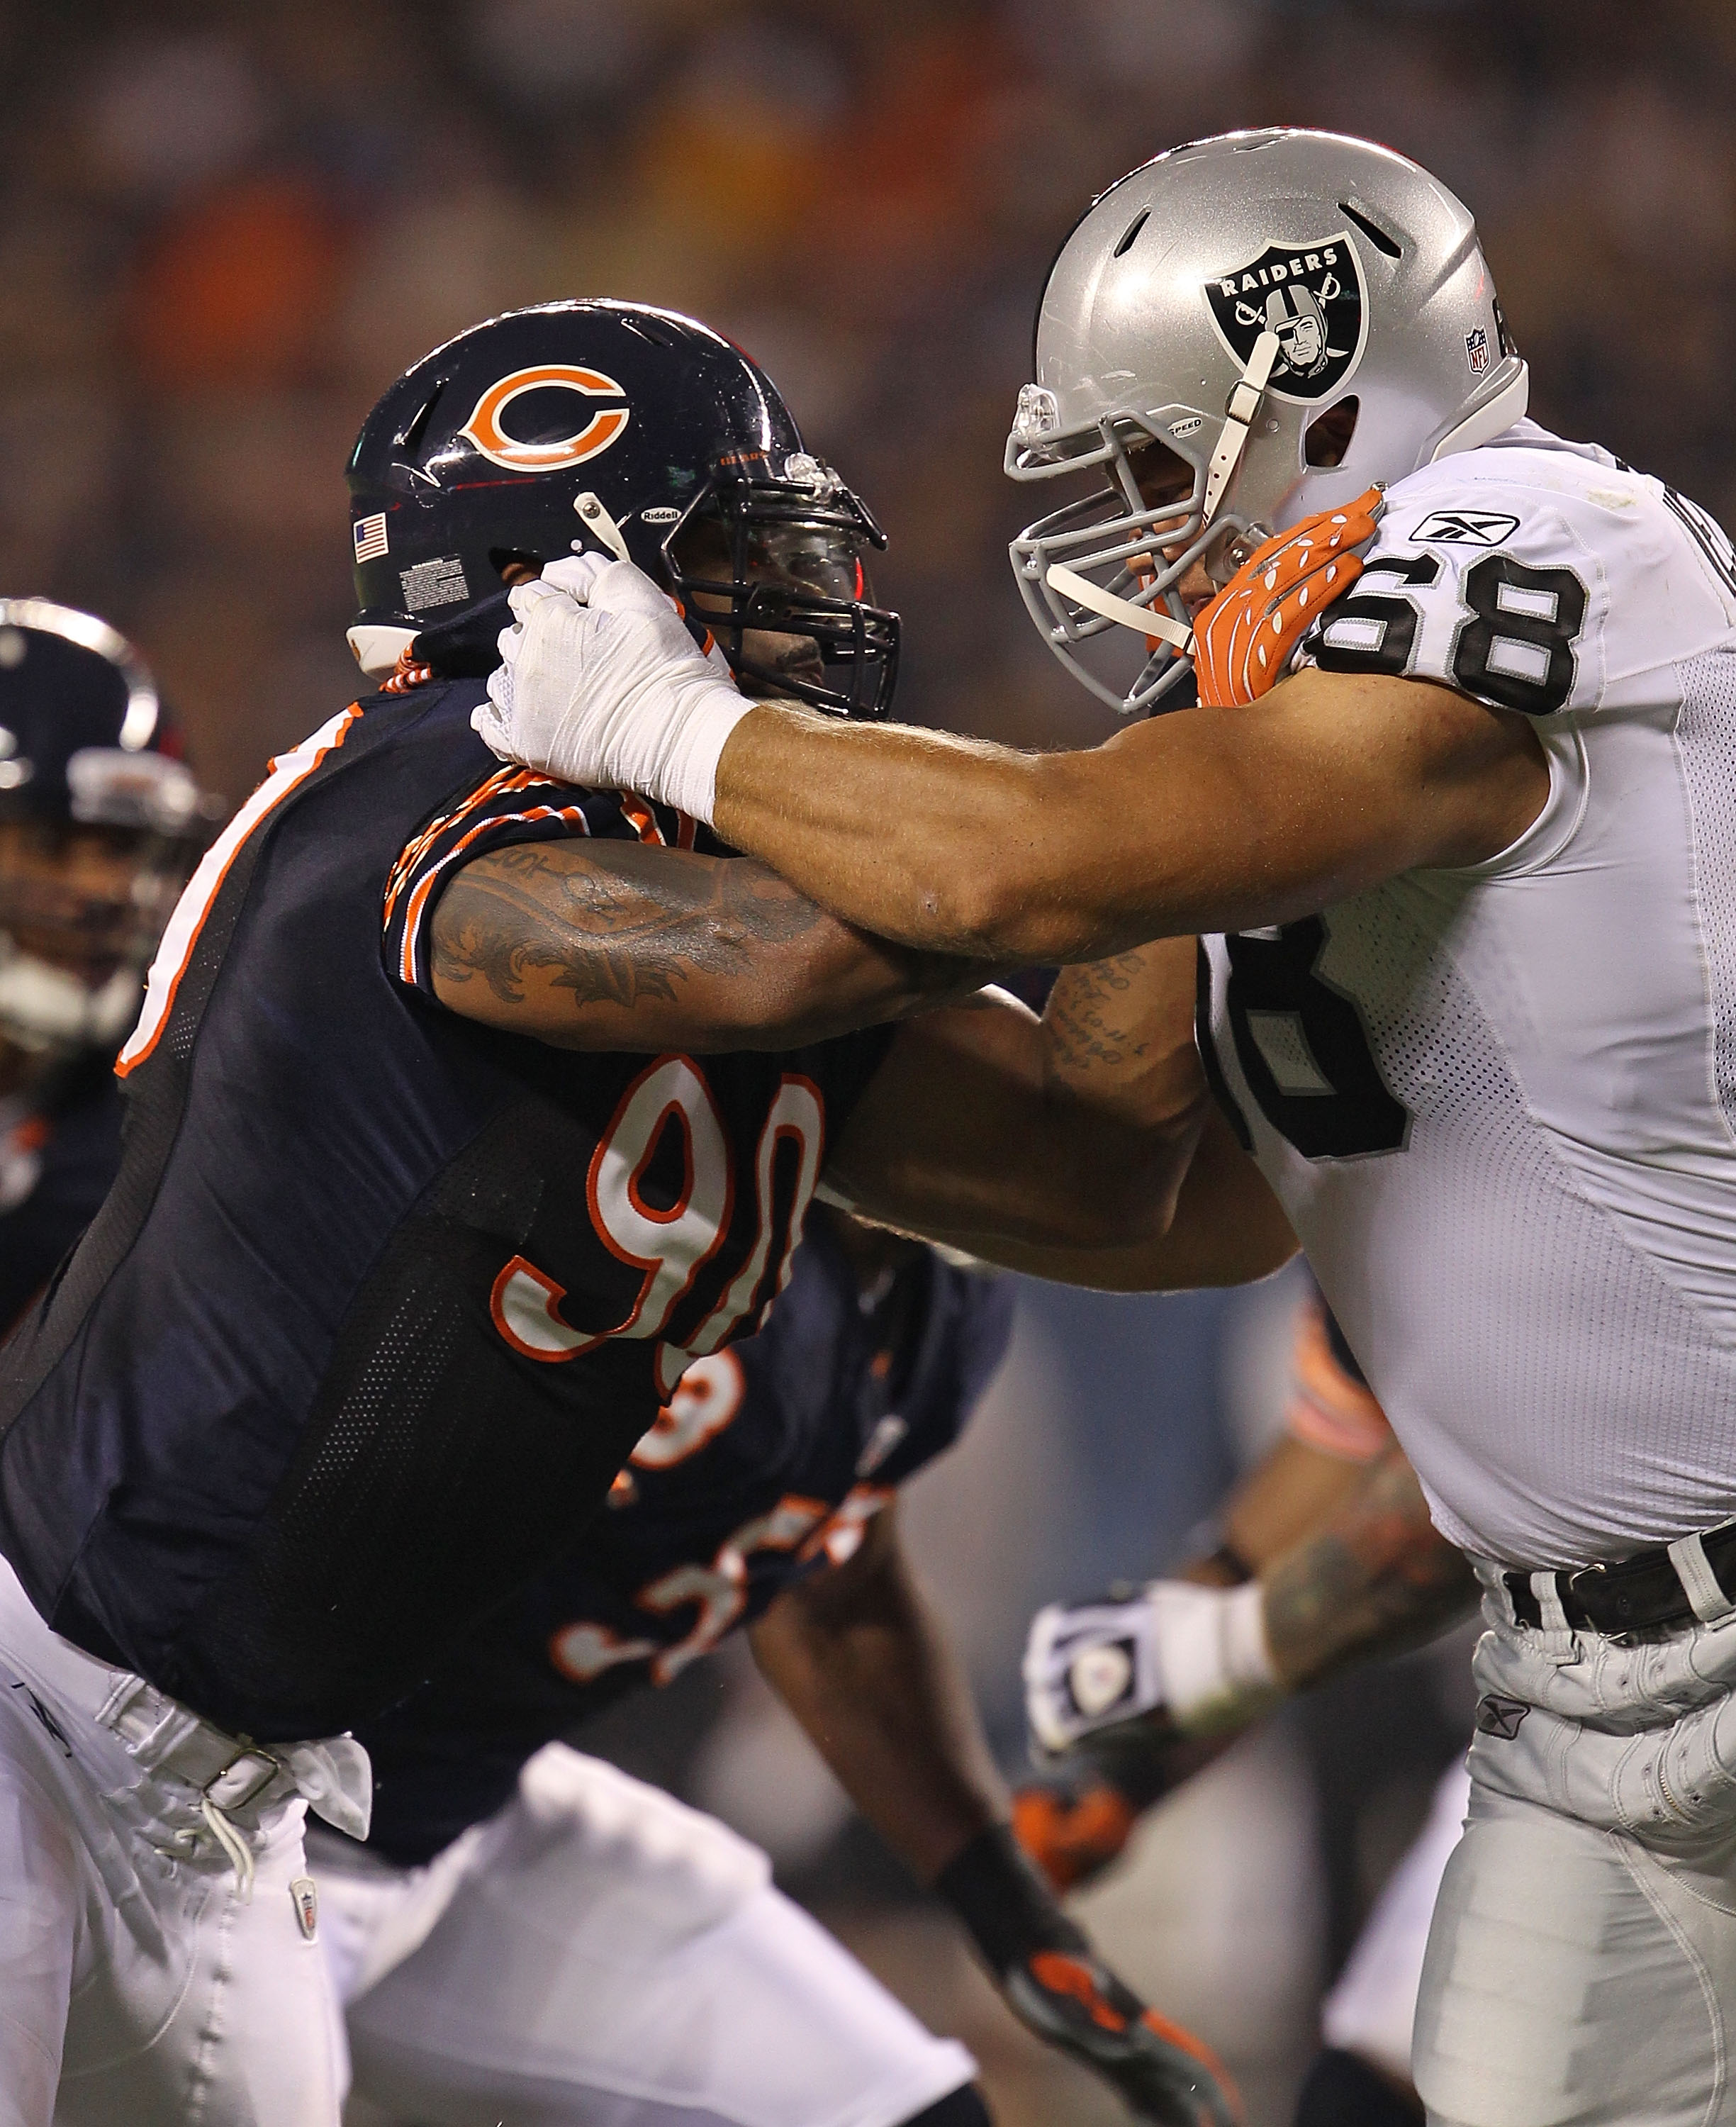 CHICAGO - AUGUST 21: Julius Peppers #90 of the Chicago Bears rushes against Jared Veldheer #68 of the Oakland Raiders during a preseason game at Soldier Field on August 21, 2010 in Chicago, Illinois. The Radiers defeated the Bears 32-17. (Photo by Jonatha